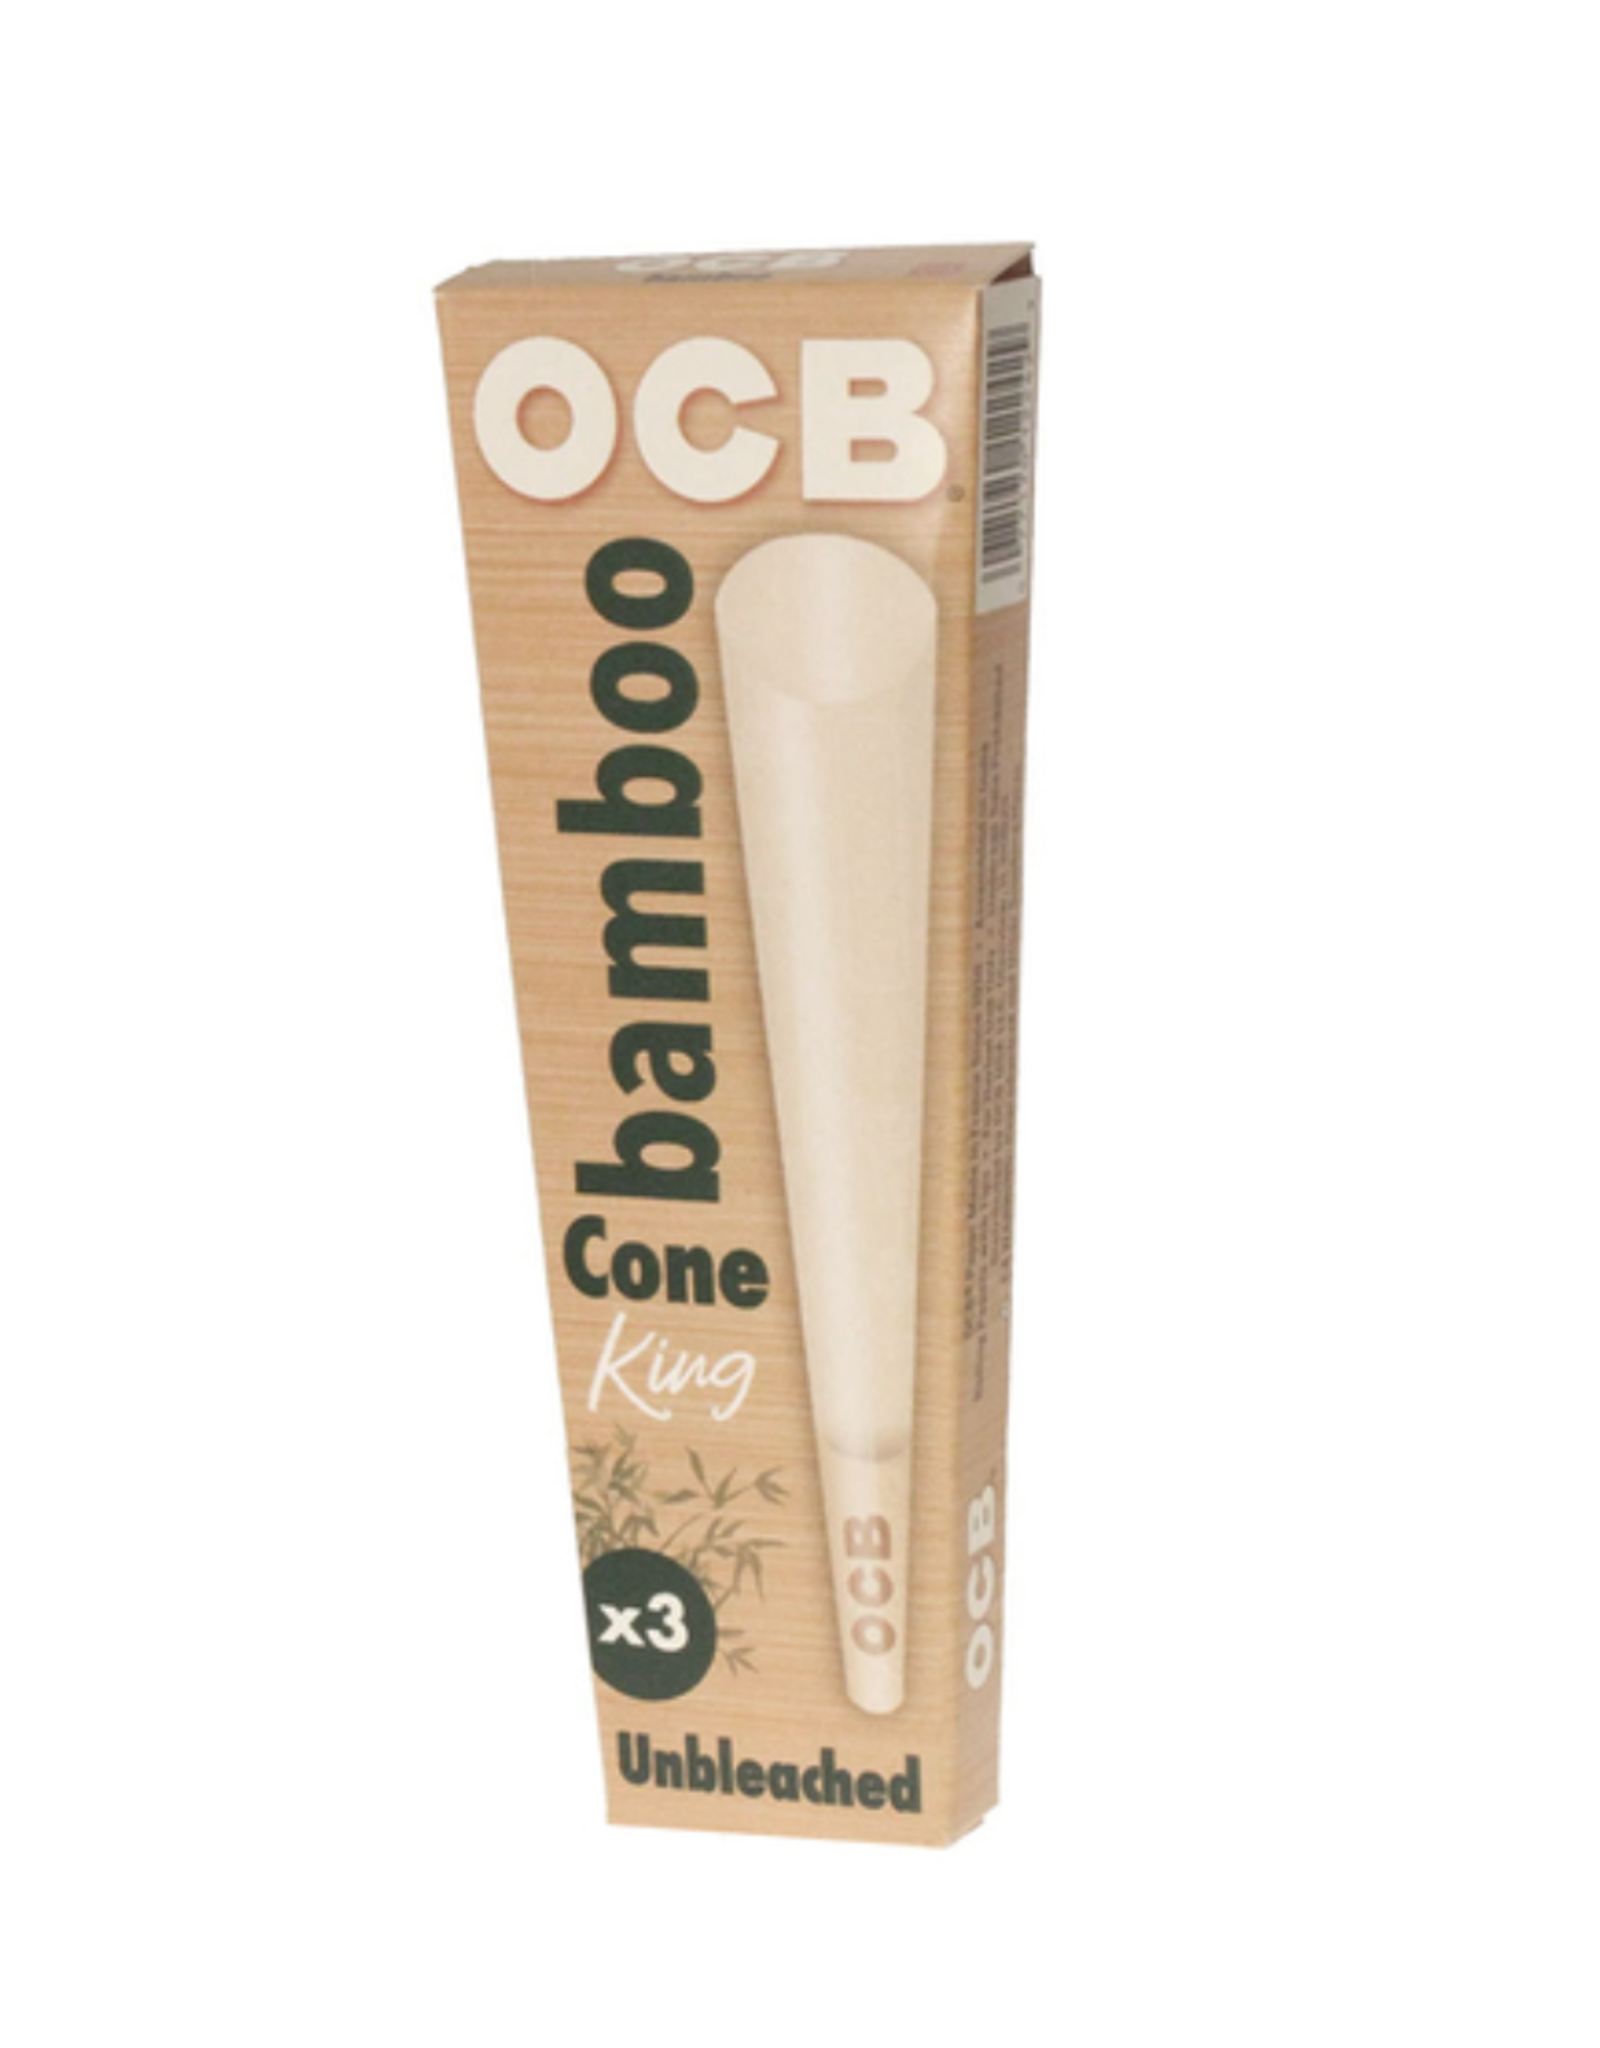 OCB King Size Bamboo Pre-Rolled Cones - 3 Cones per Pack